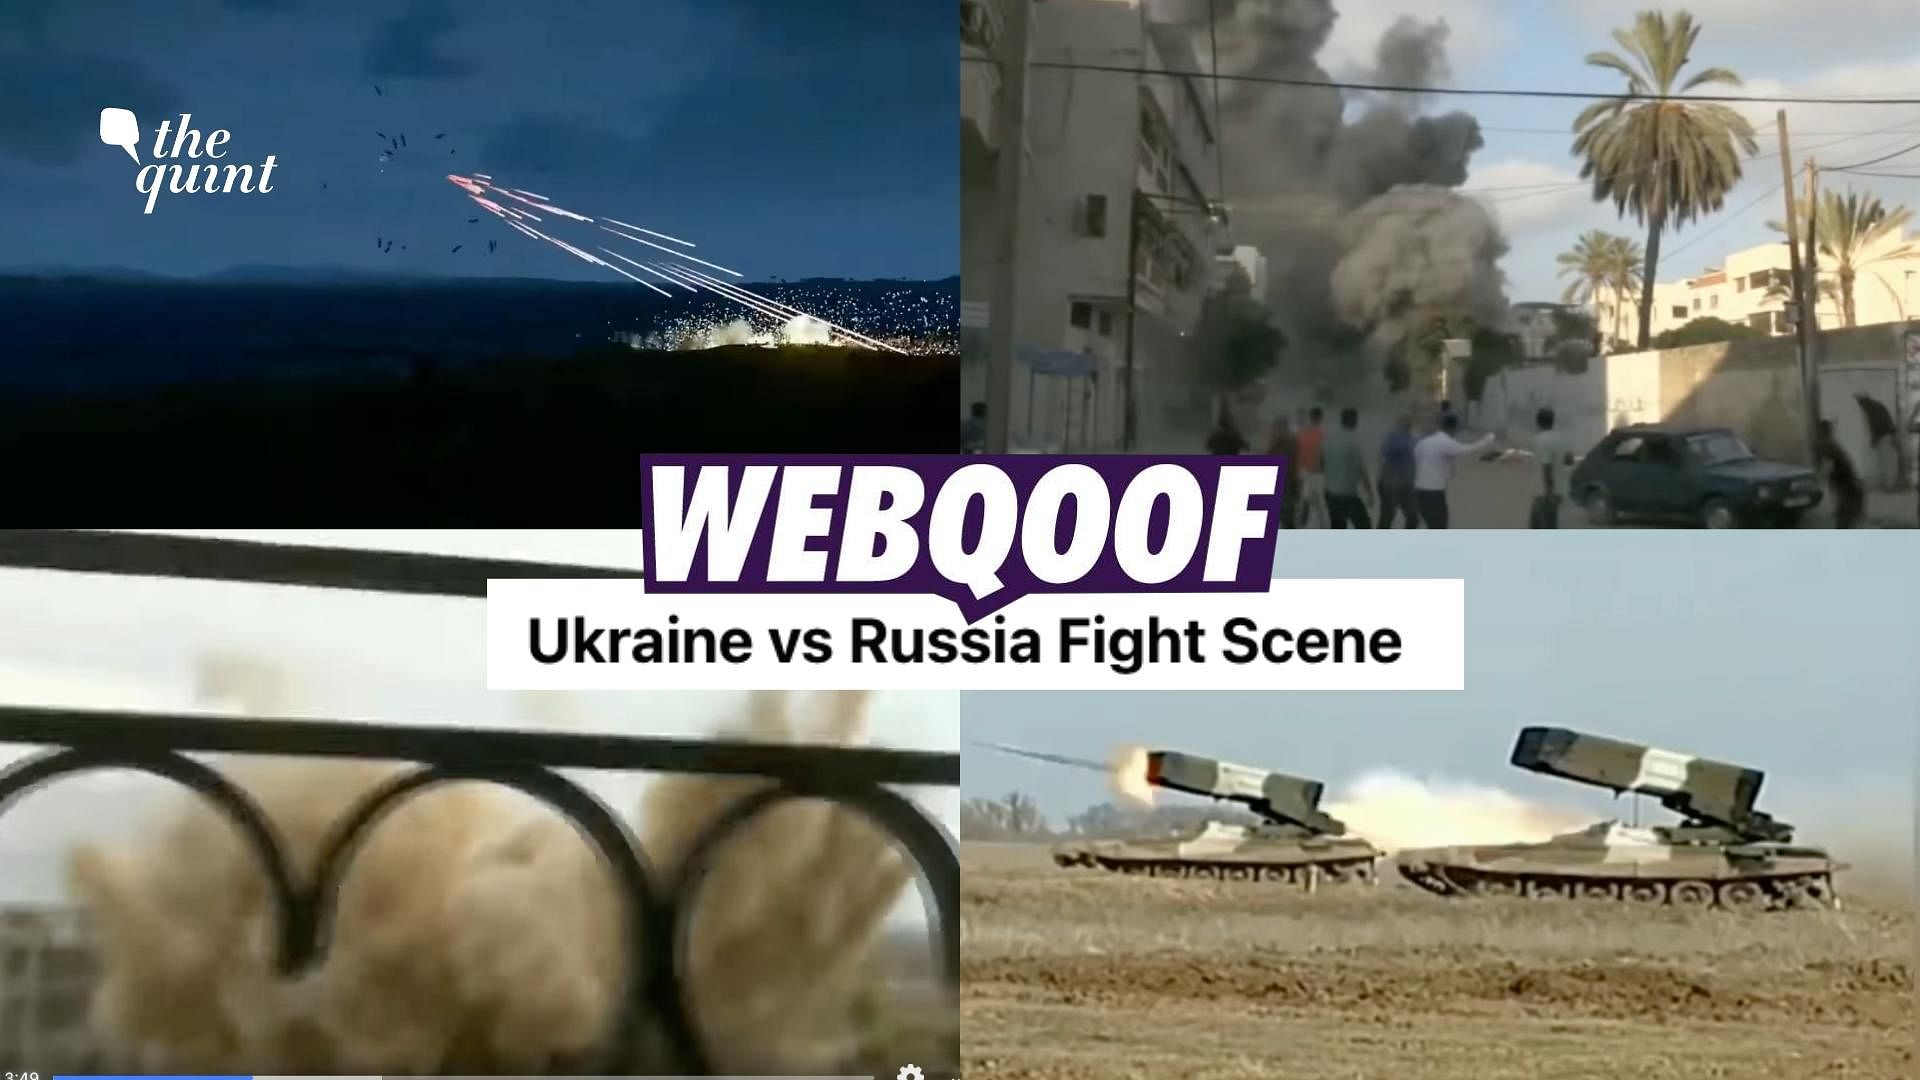 <div class="paragraphs"><p>The claim states that the video shows a compilation of 'Ukraine-Russia war footage'.&nbsp;</p></div>